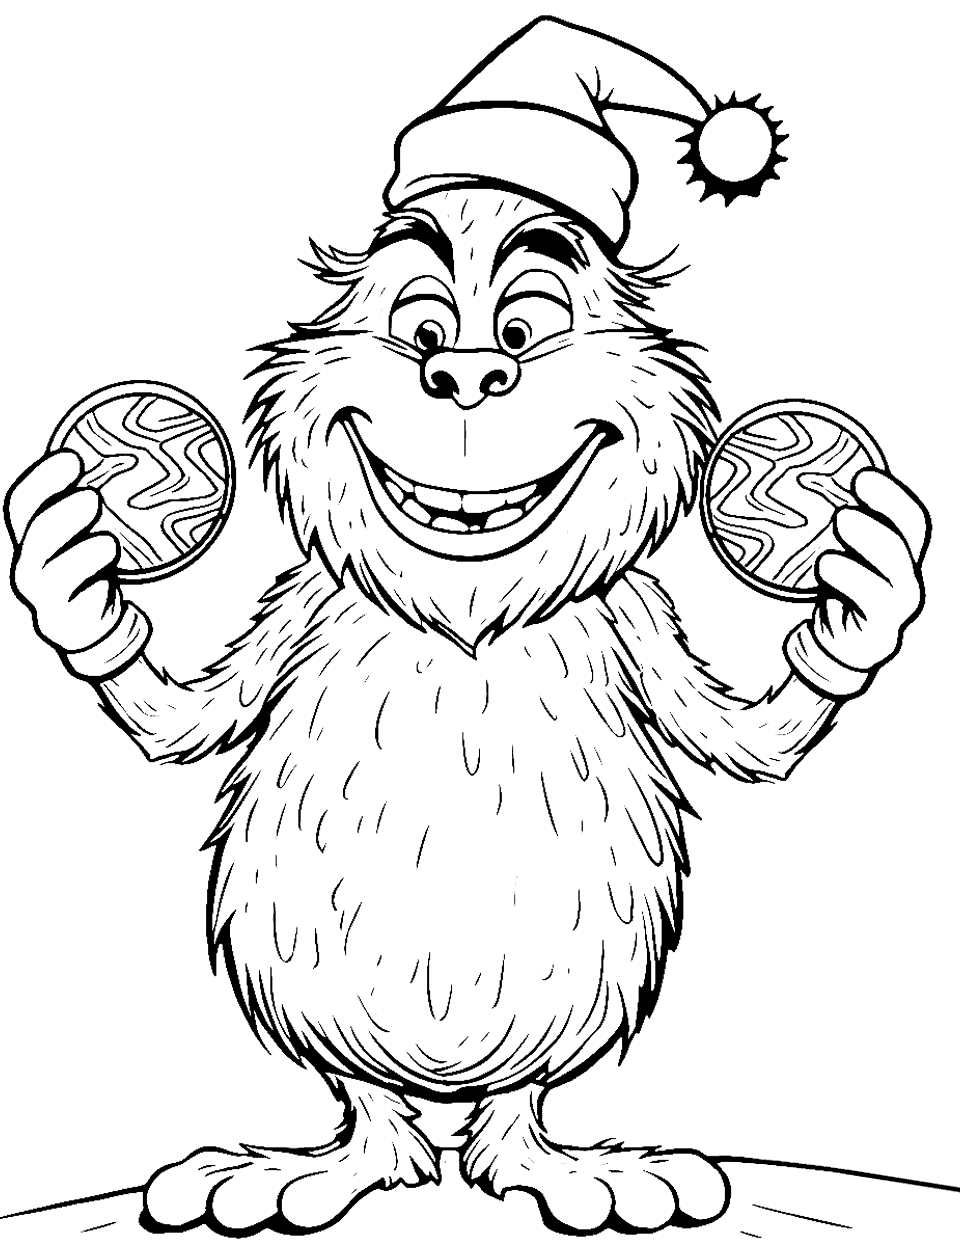 Grinch and Cookie Coloring Page - Grinch holding Christmas cookies ready to eat in one bite.